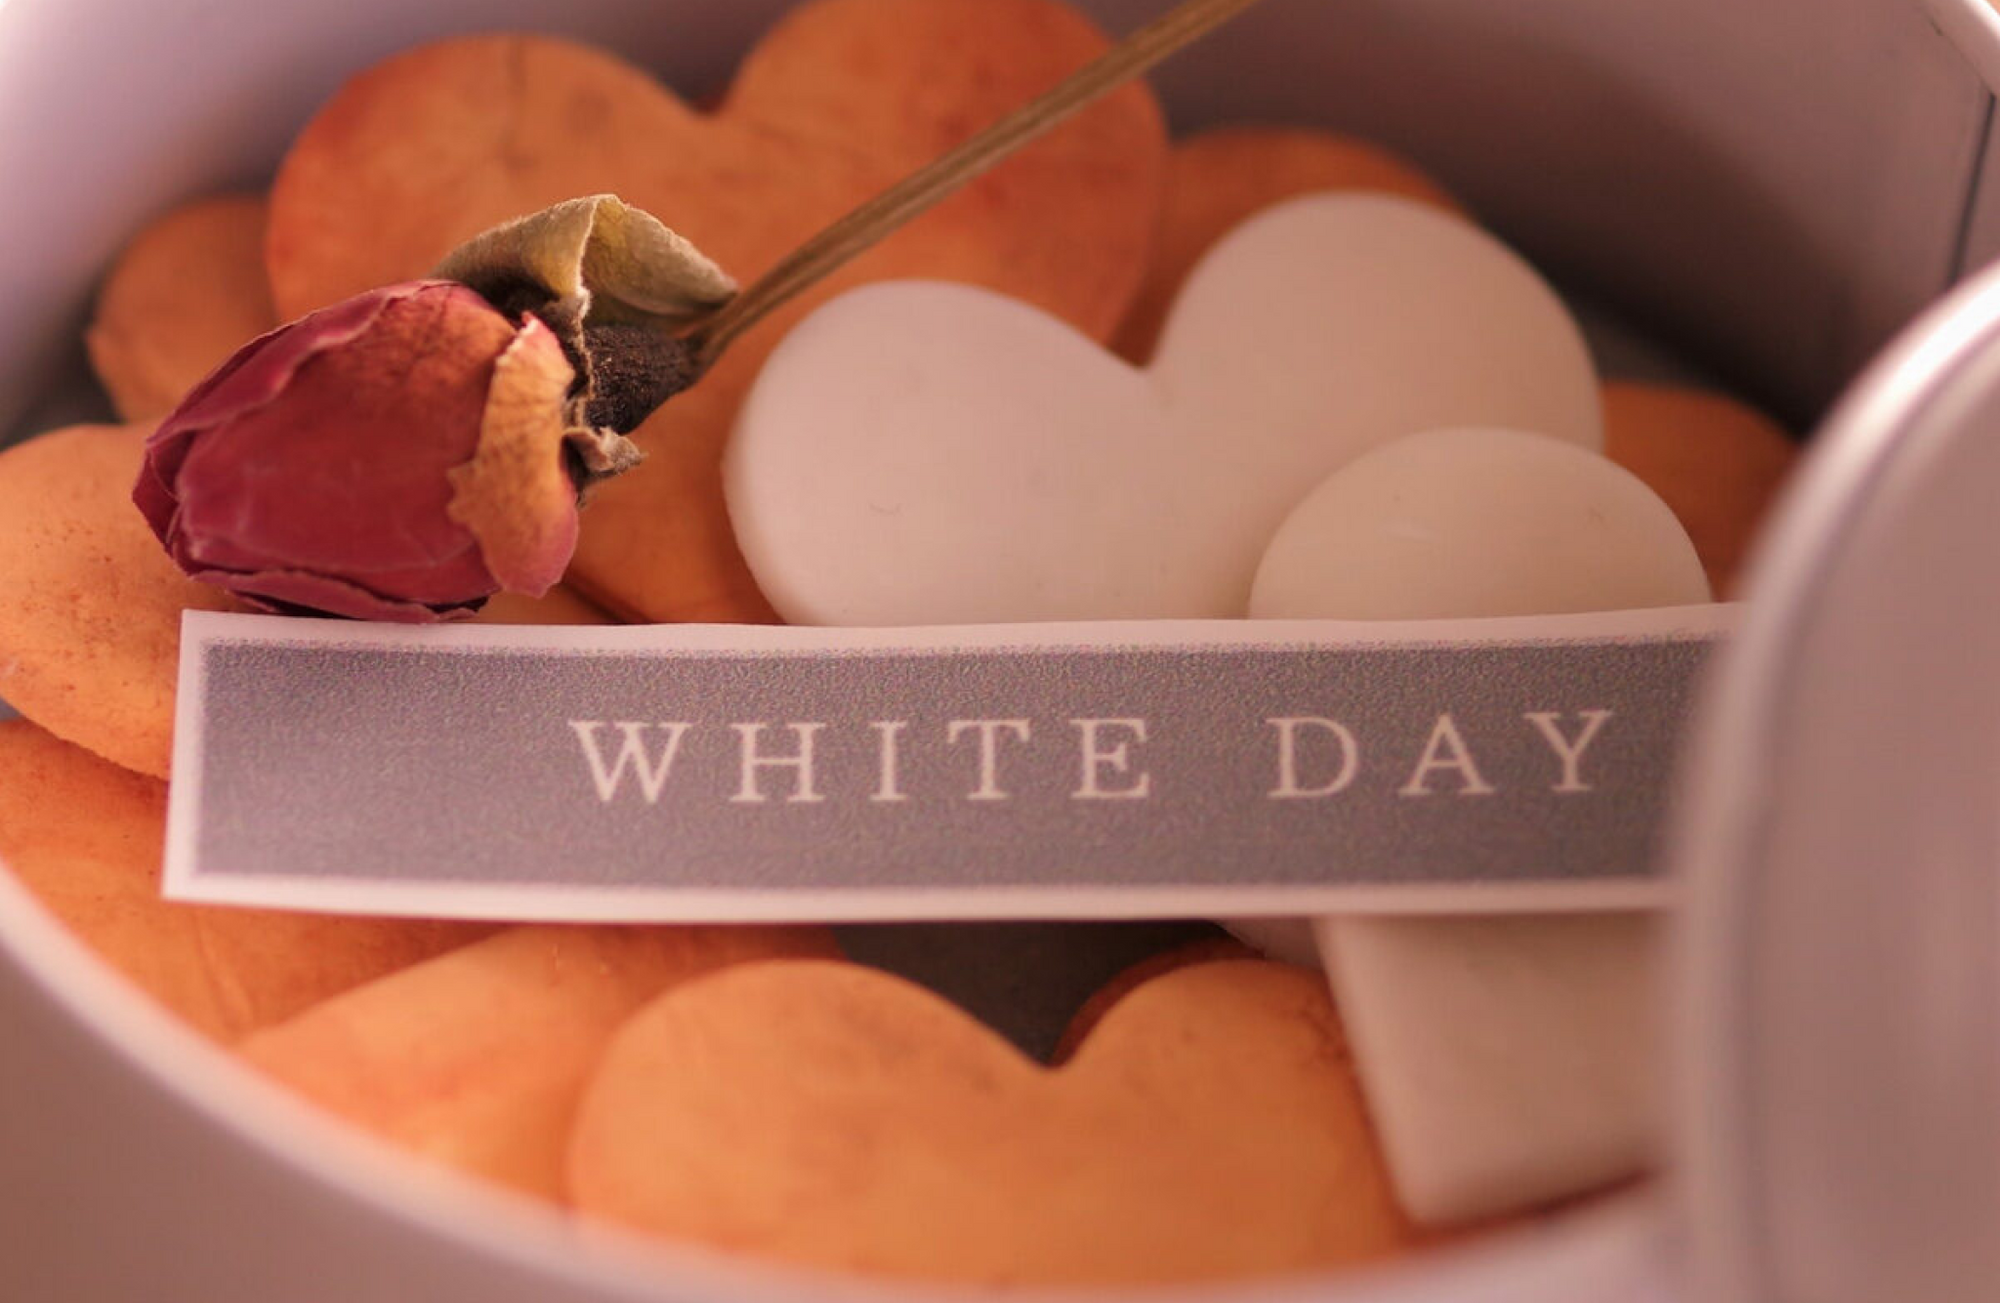 White Day, March 14th: What Is It and What Should I Do? (Men Must Read)